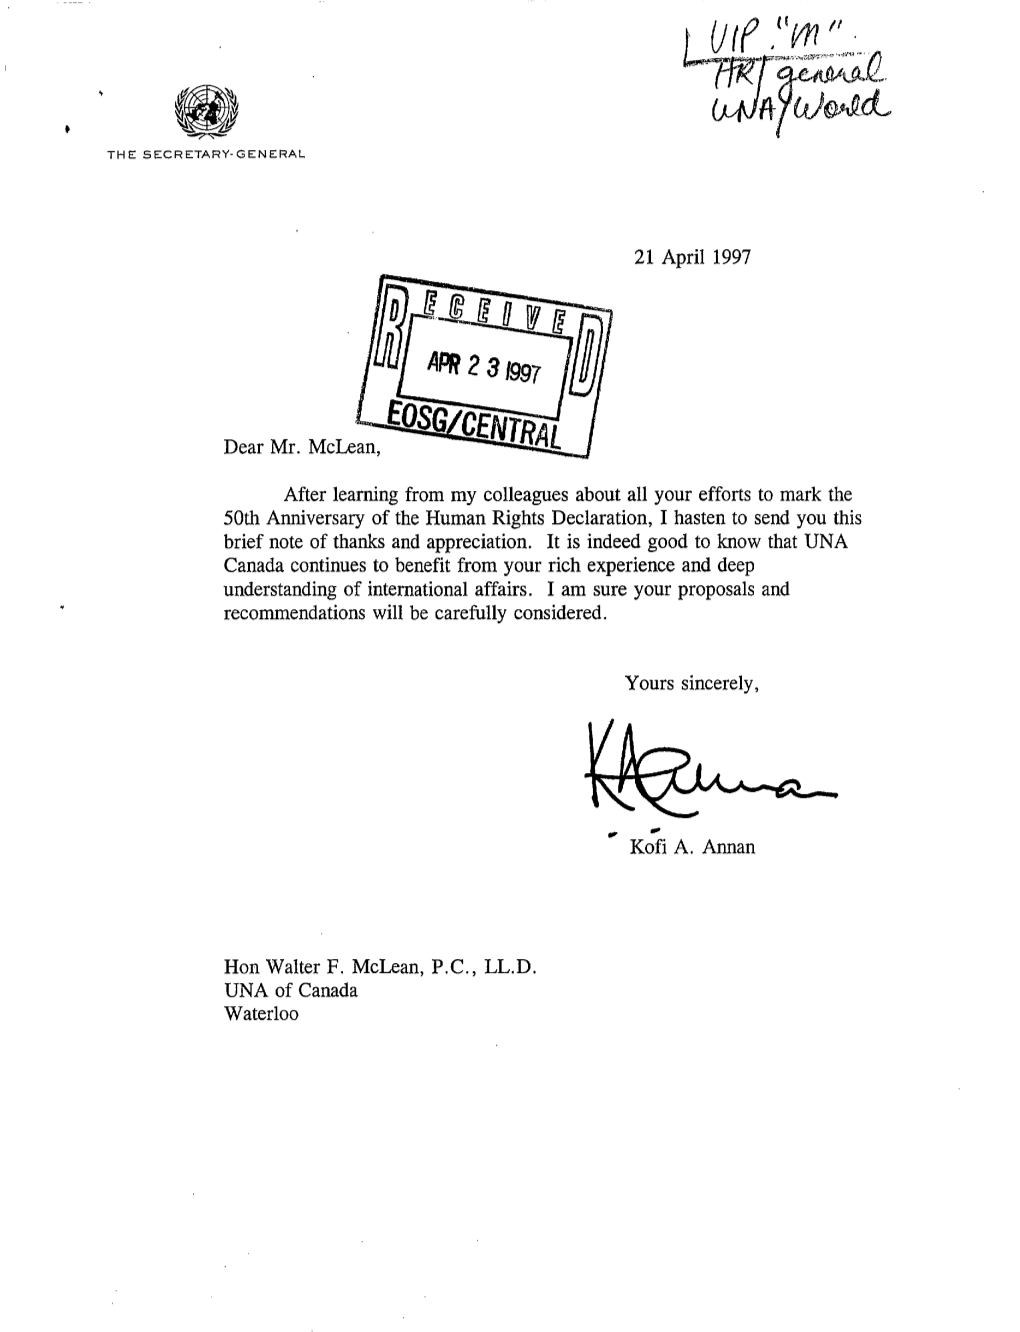 21 April 1997 Dear Mr. Mclean, After Learning from My Colleagues About